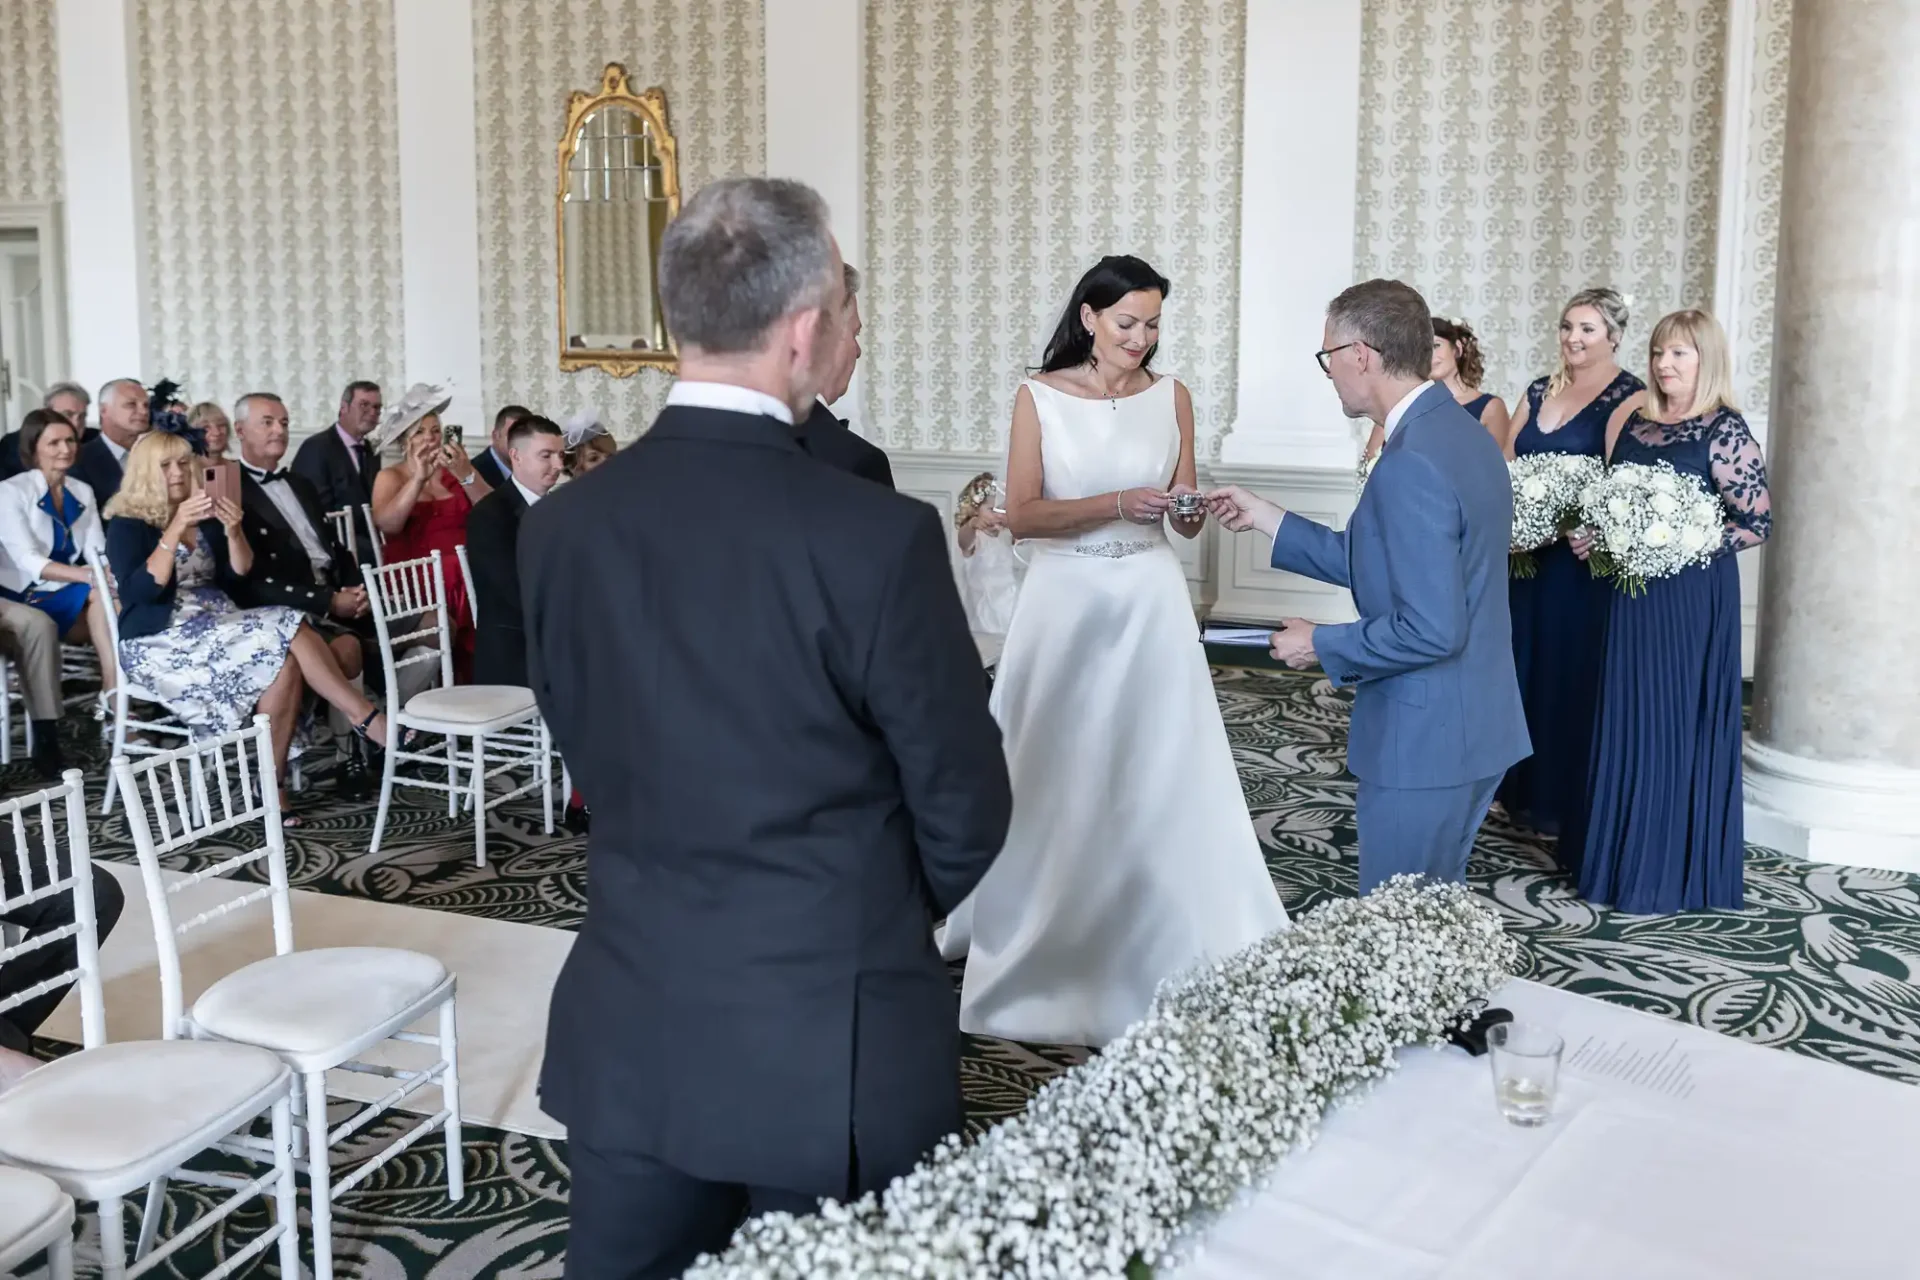 A bride and groom exchange rings during their wedding ceremony in a grand room filled with guests.